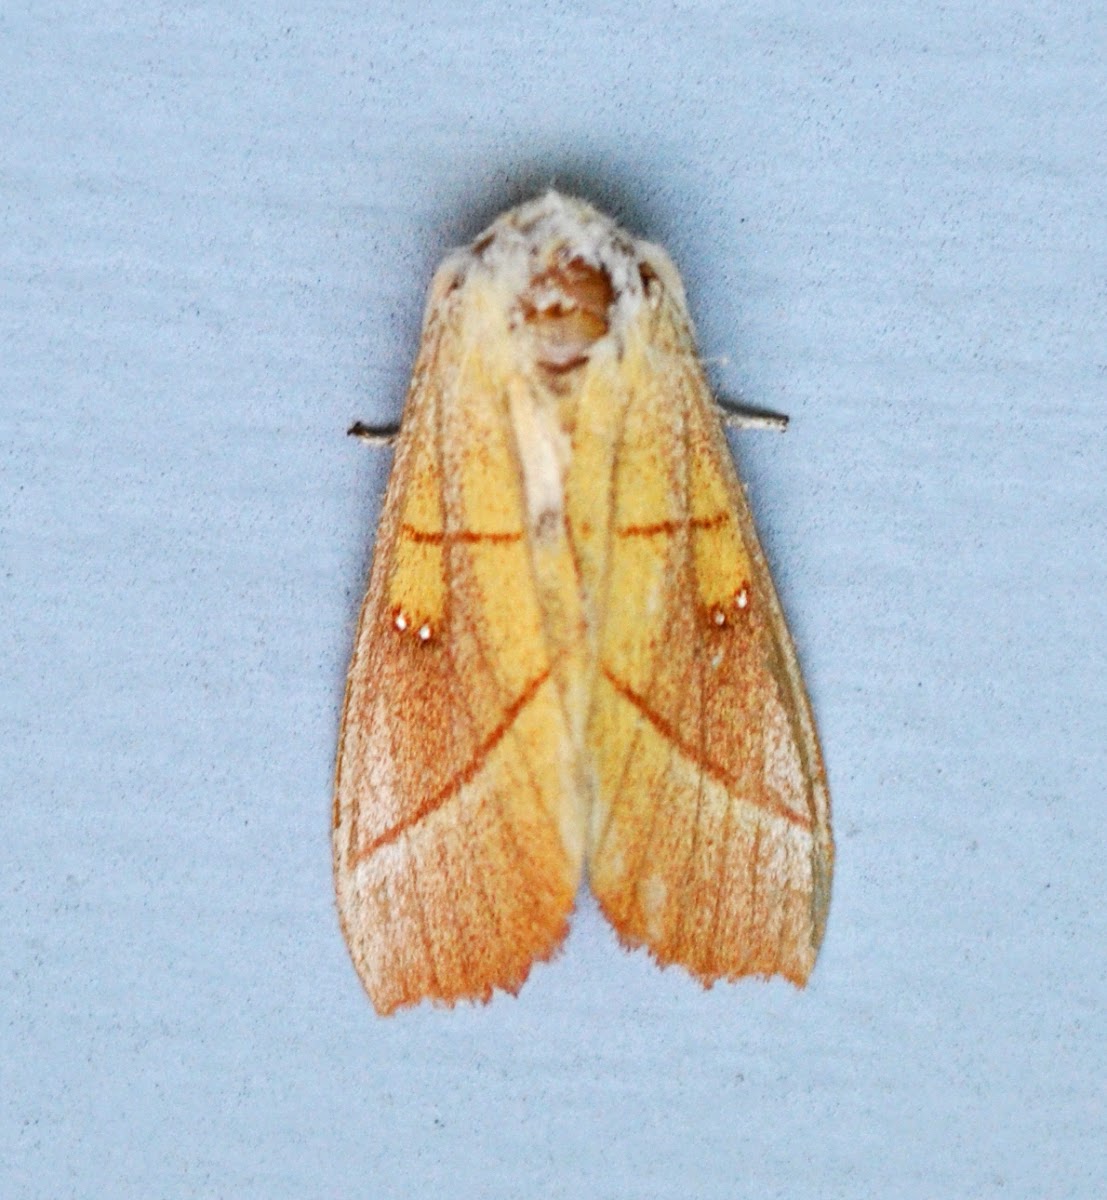 White-Dotted Prominent Moth